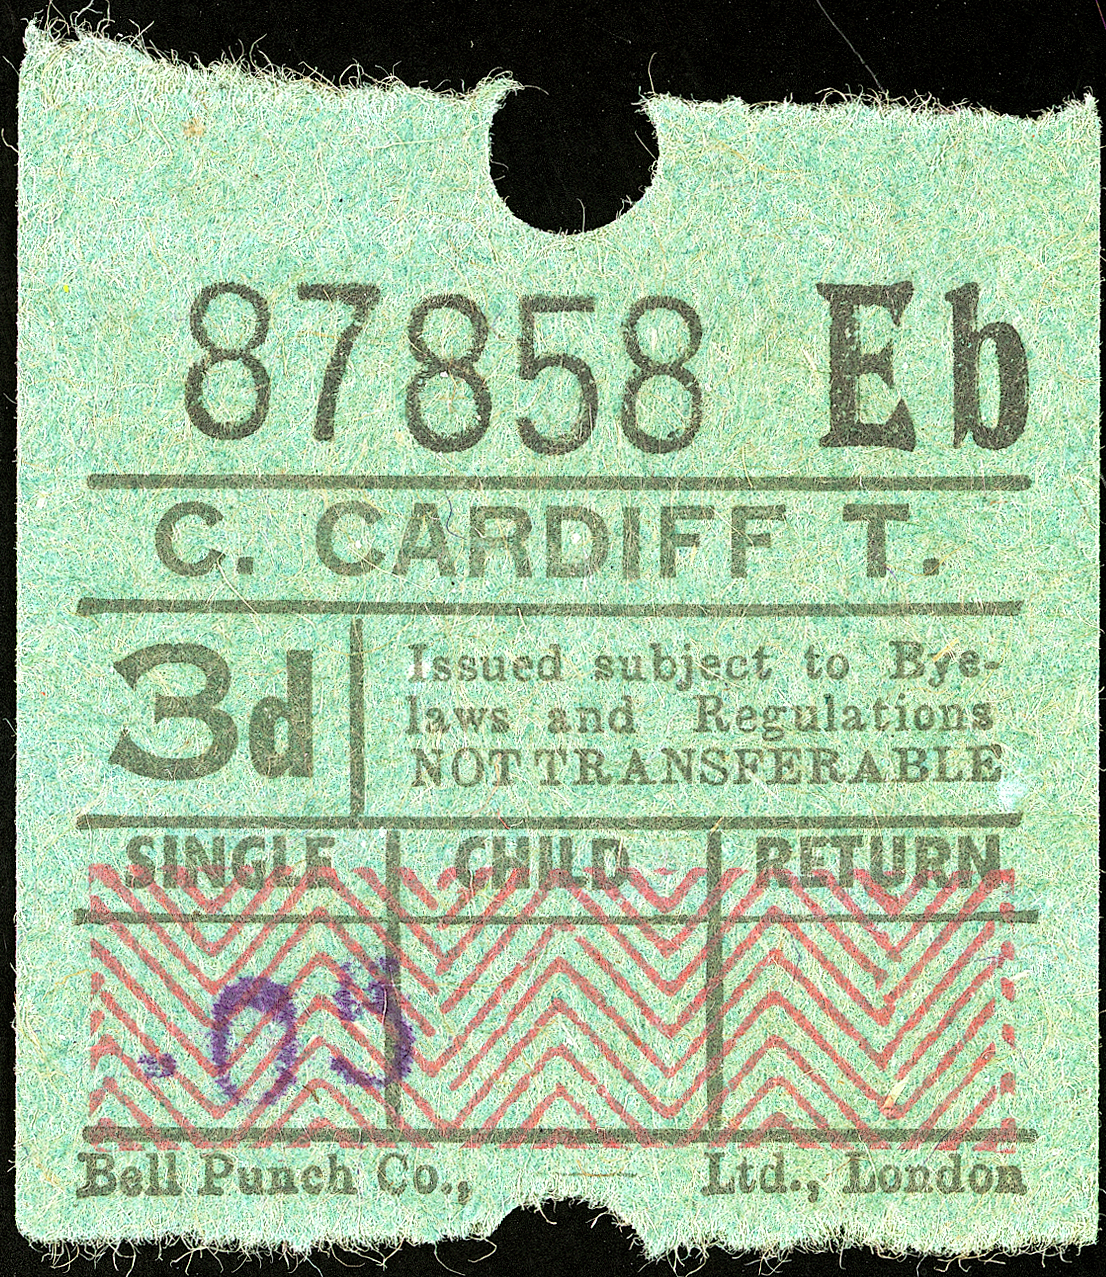 City of Cardiff Transport bus ticket